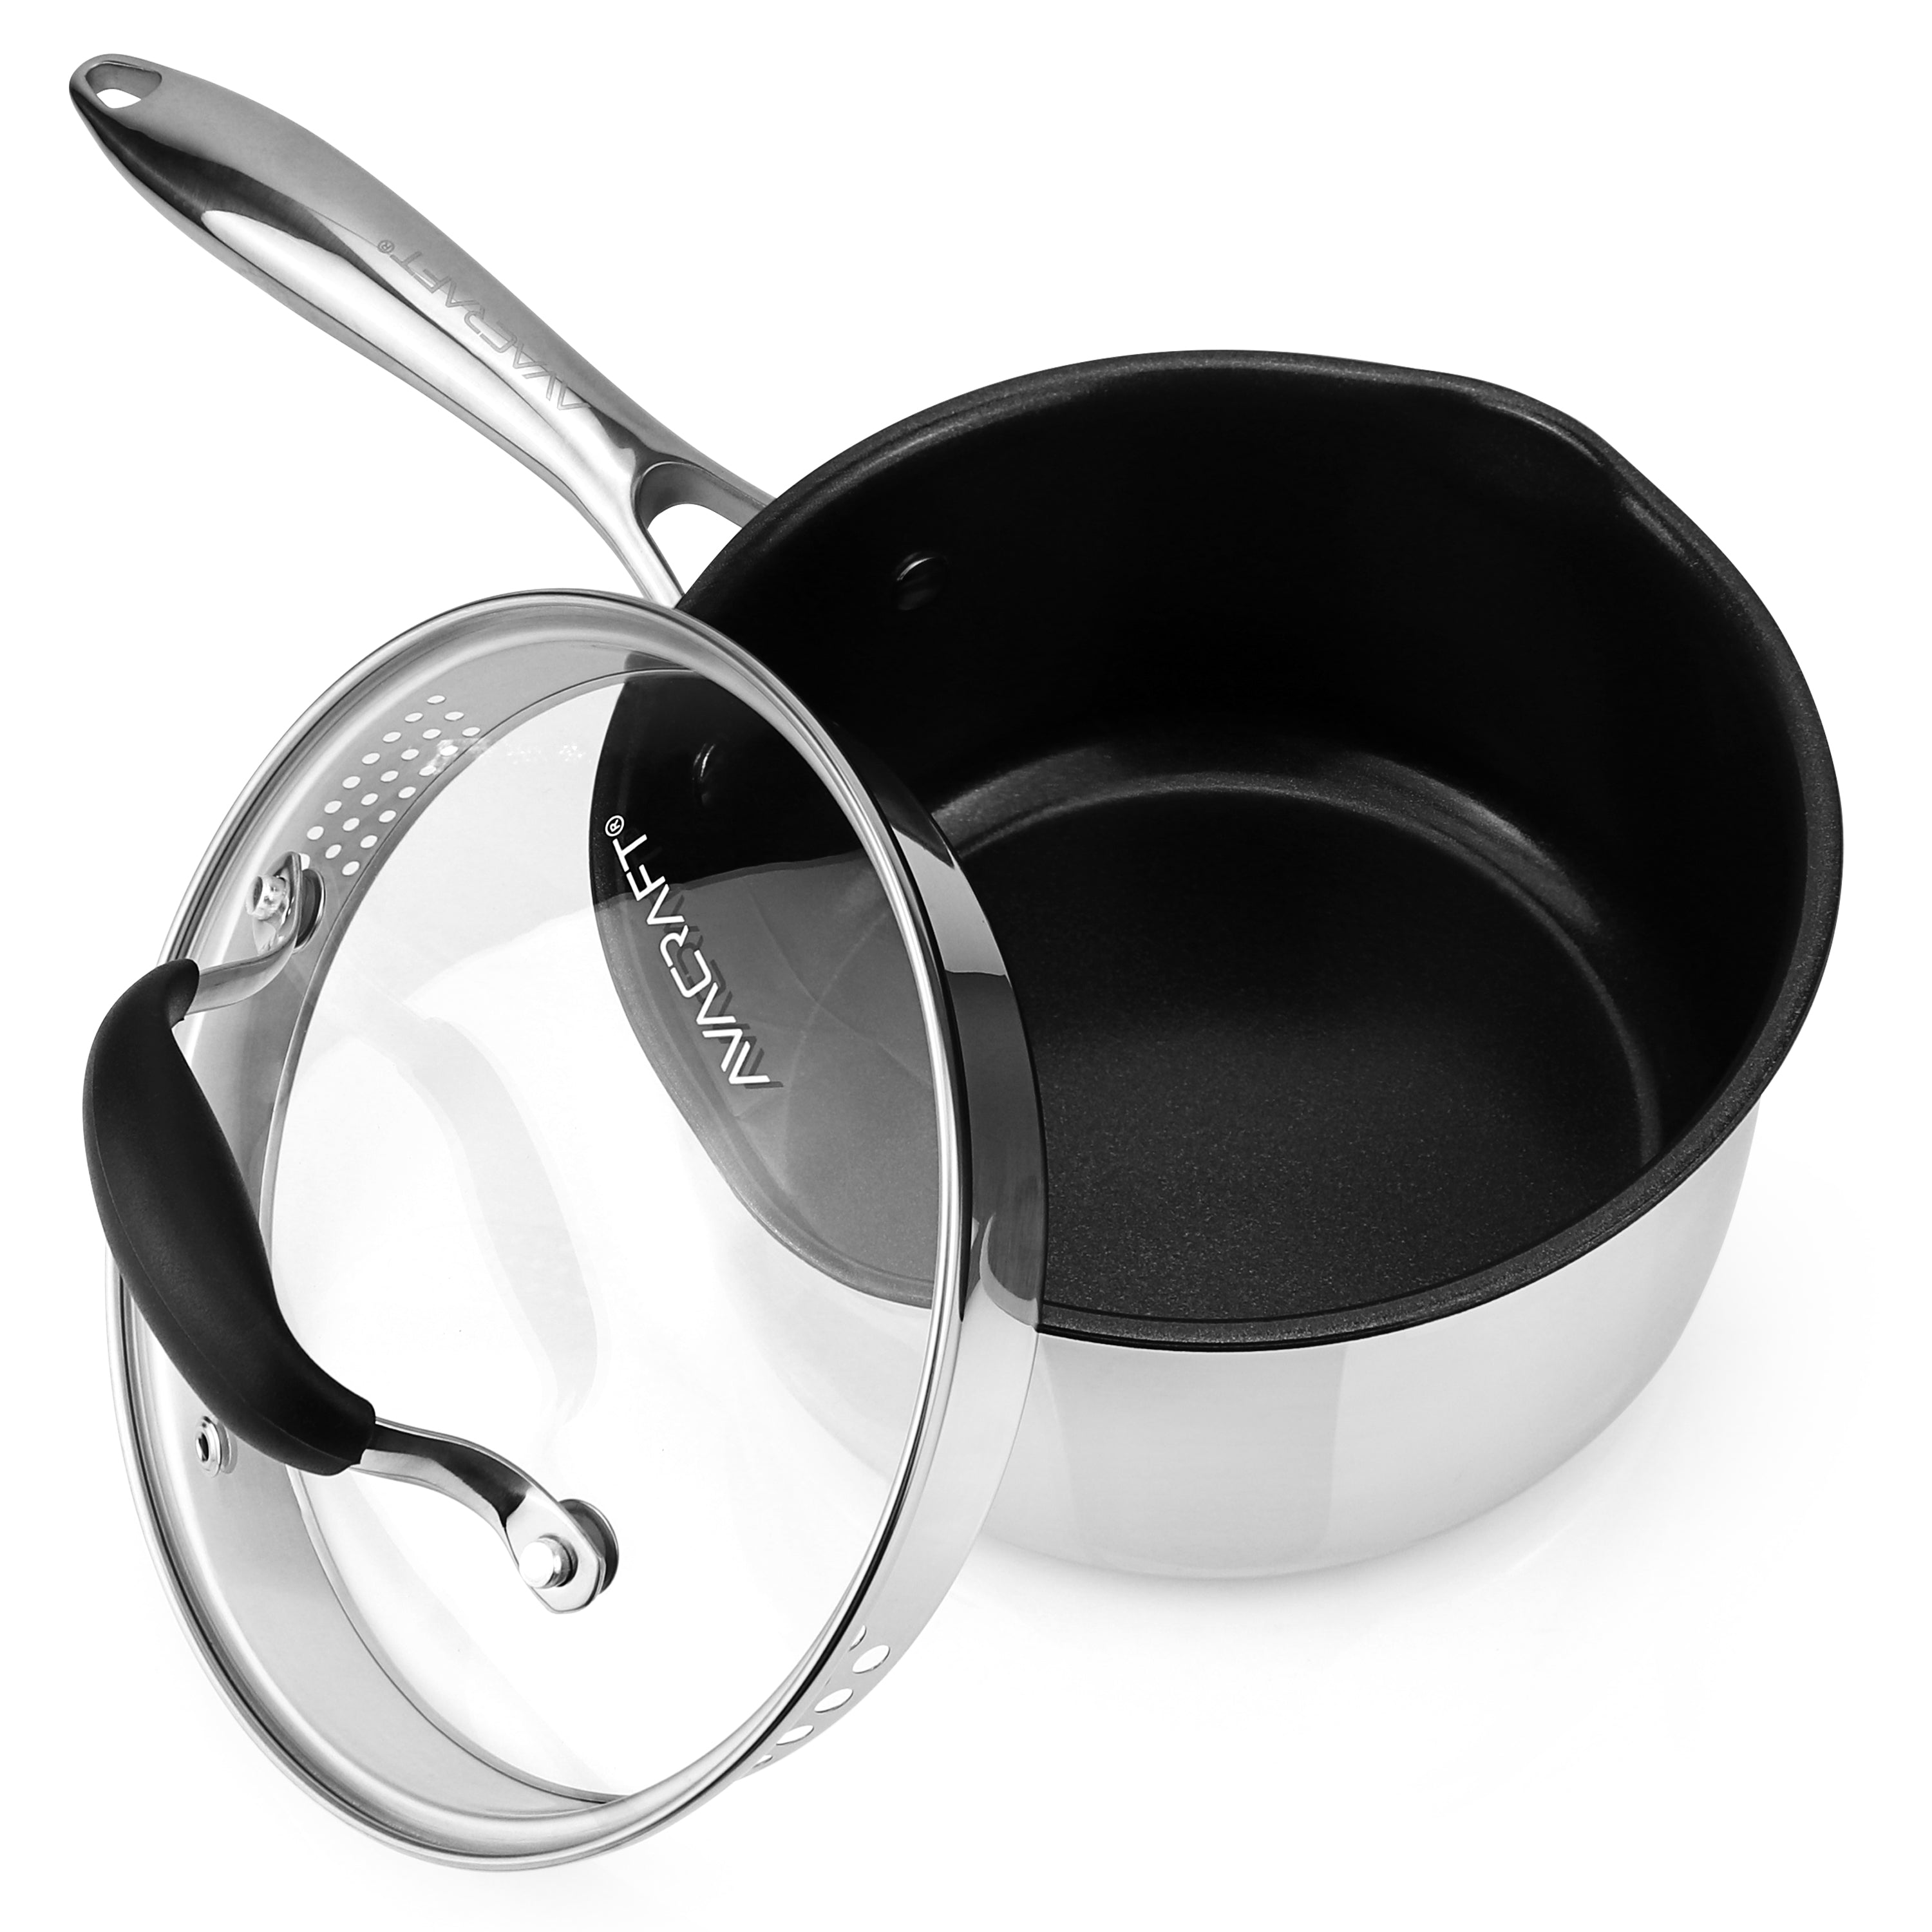 AVACRAFT 9 inch Nonstick Everyday Pan, Ceramic MultiClad Stainless Steel, 100 PTFE, PFOA Toxins Free, Ceramic Chefs Pan with GLA